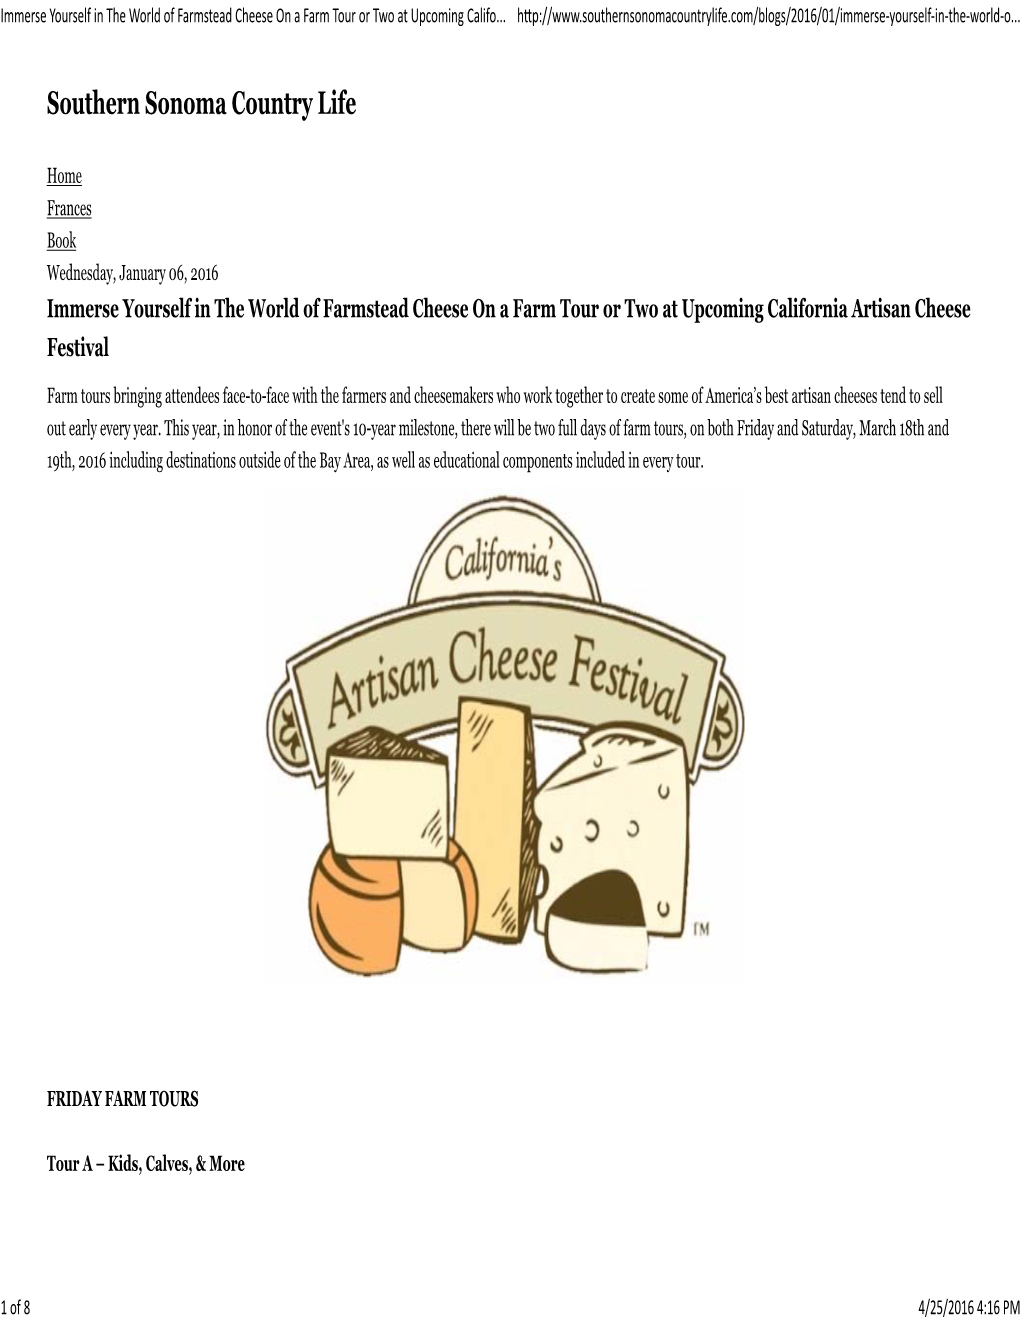 Immerse Yourself in the World of Farmstead Cheese on a Farm Tour Or Two at Upcoming California Artisan Cheese Festival